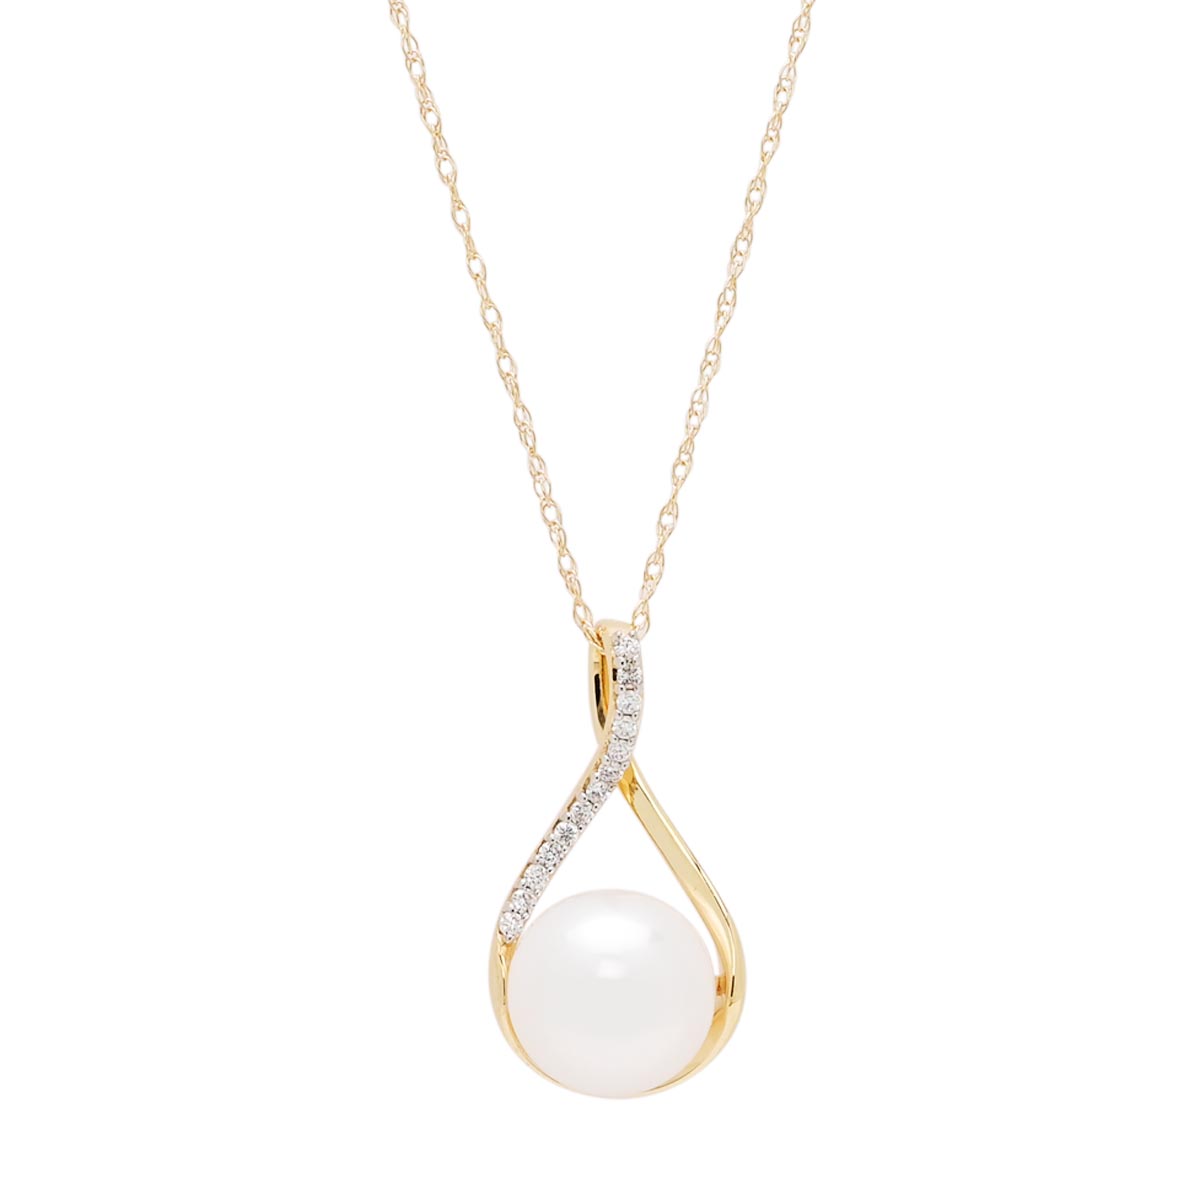 Mastoloni Cultured Freshwater Pearl Necklace in 14kt Yellow Gold with Diamonds (1/20ct tw and 7.5-8mm pearl)